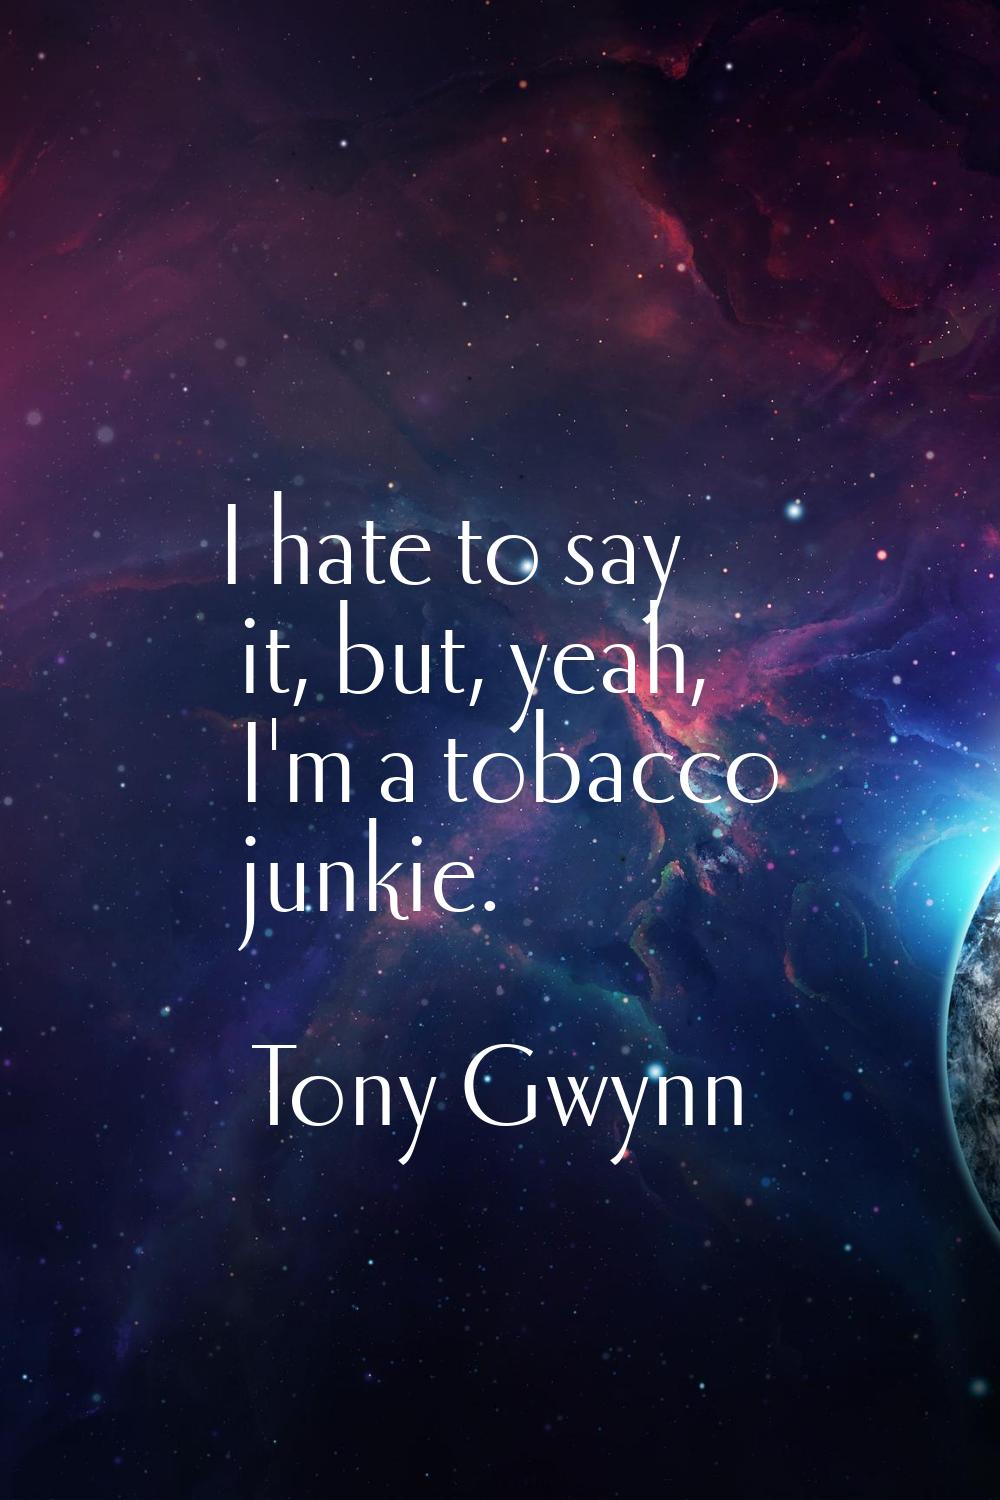 I hate to say it, but, yeah, I'm a tobacco junkie.